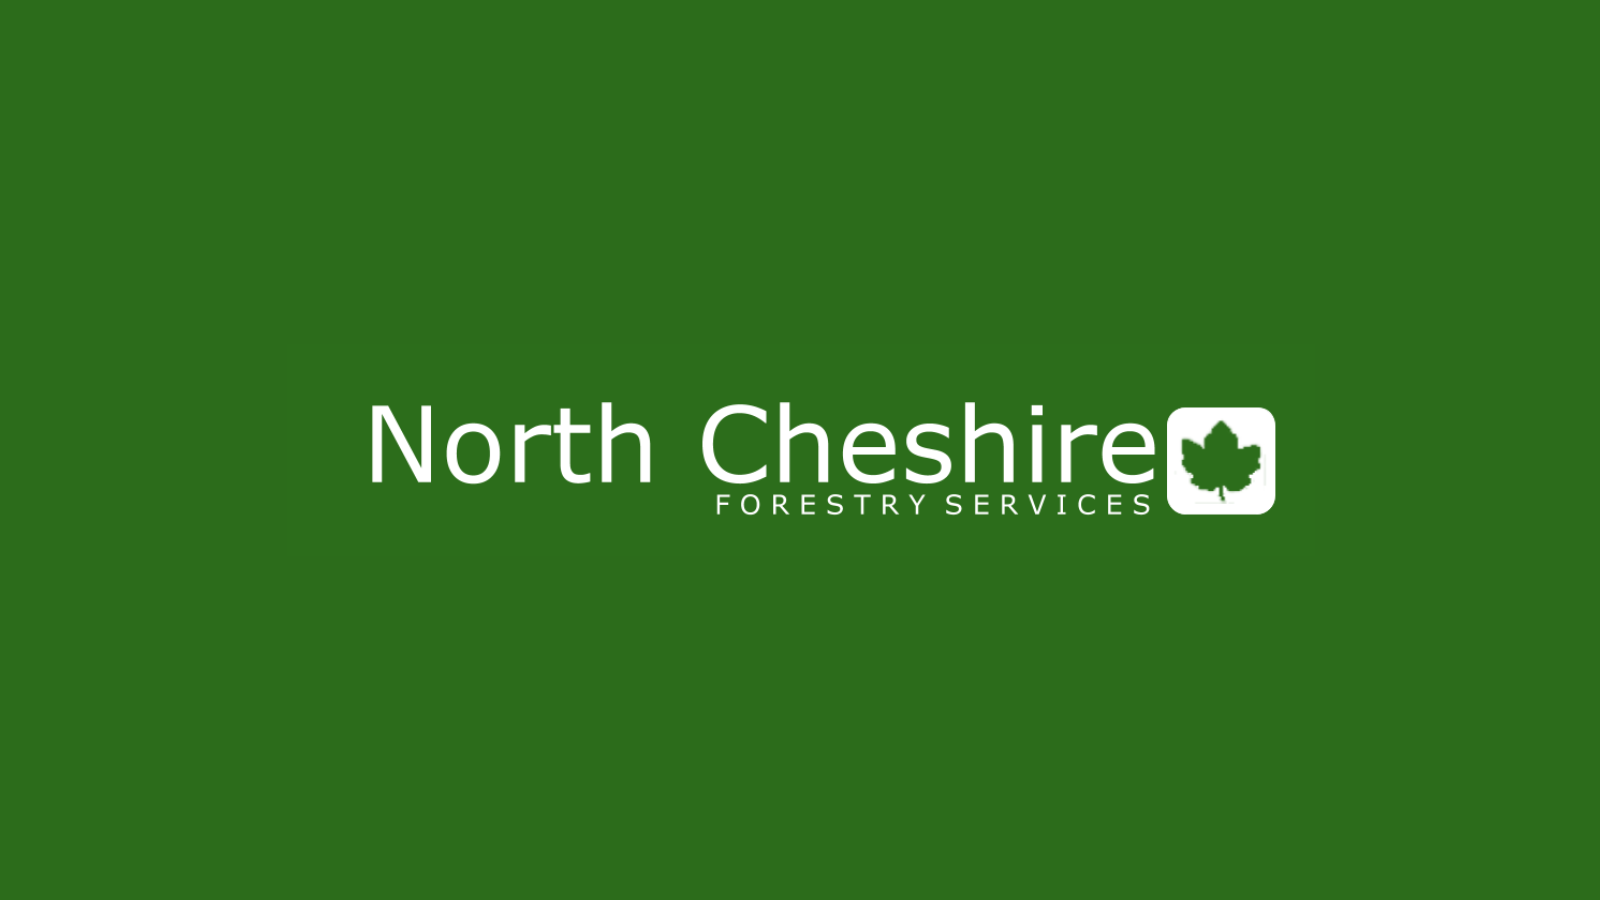 North Cheshire Forestry Announces Tree and Hedge Services in Stockport